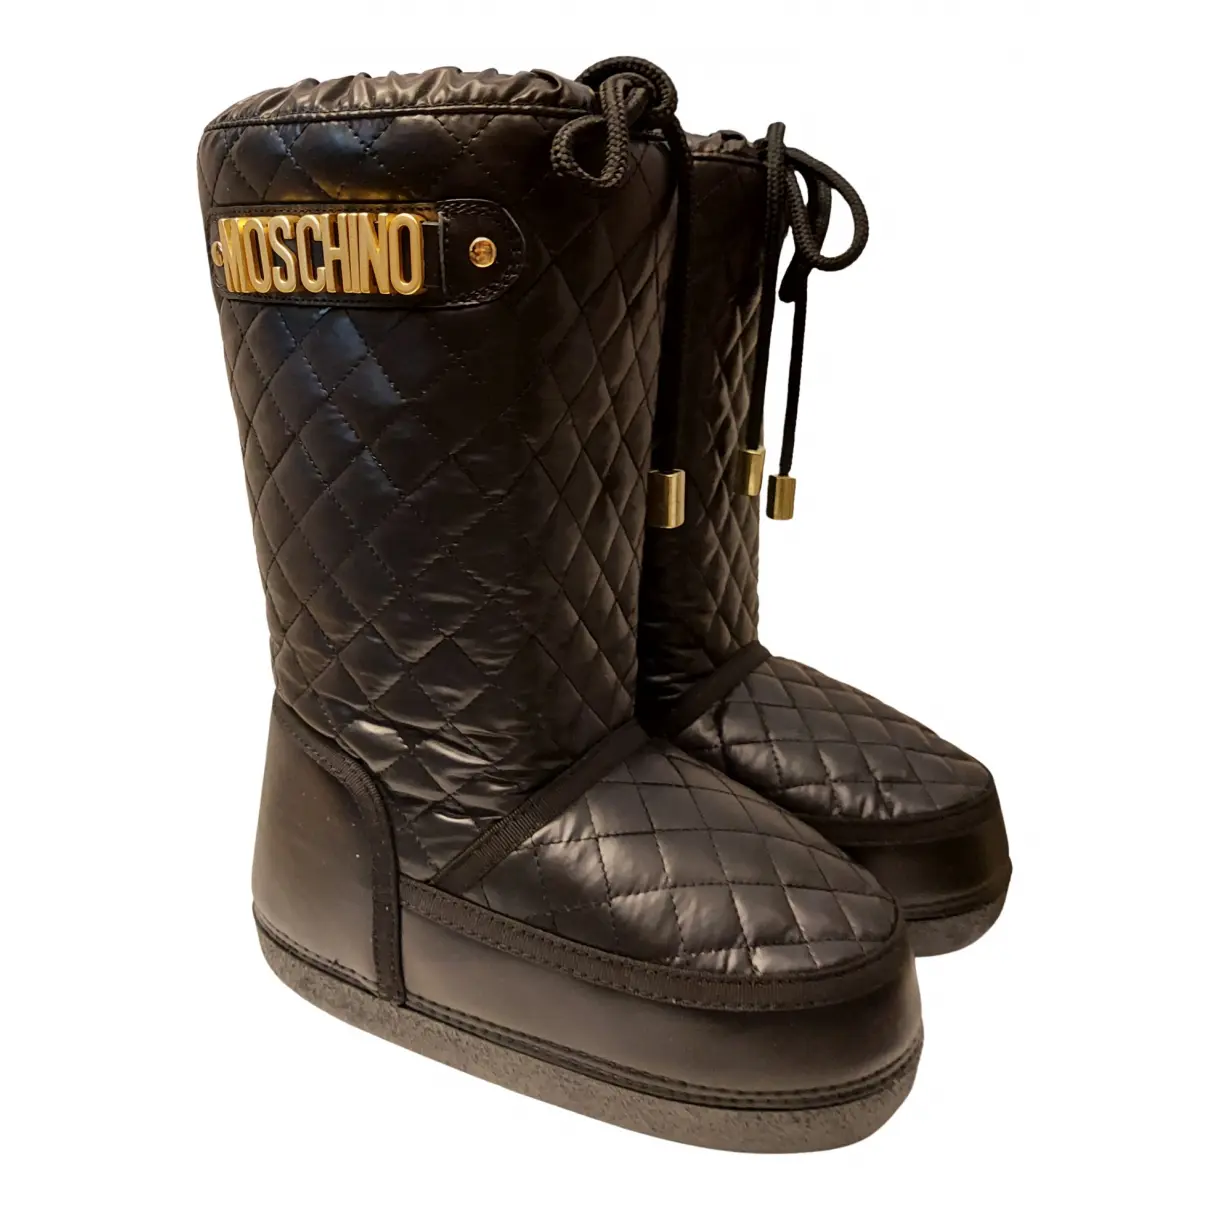 Vegan leather boots Moschino